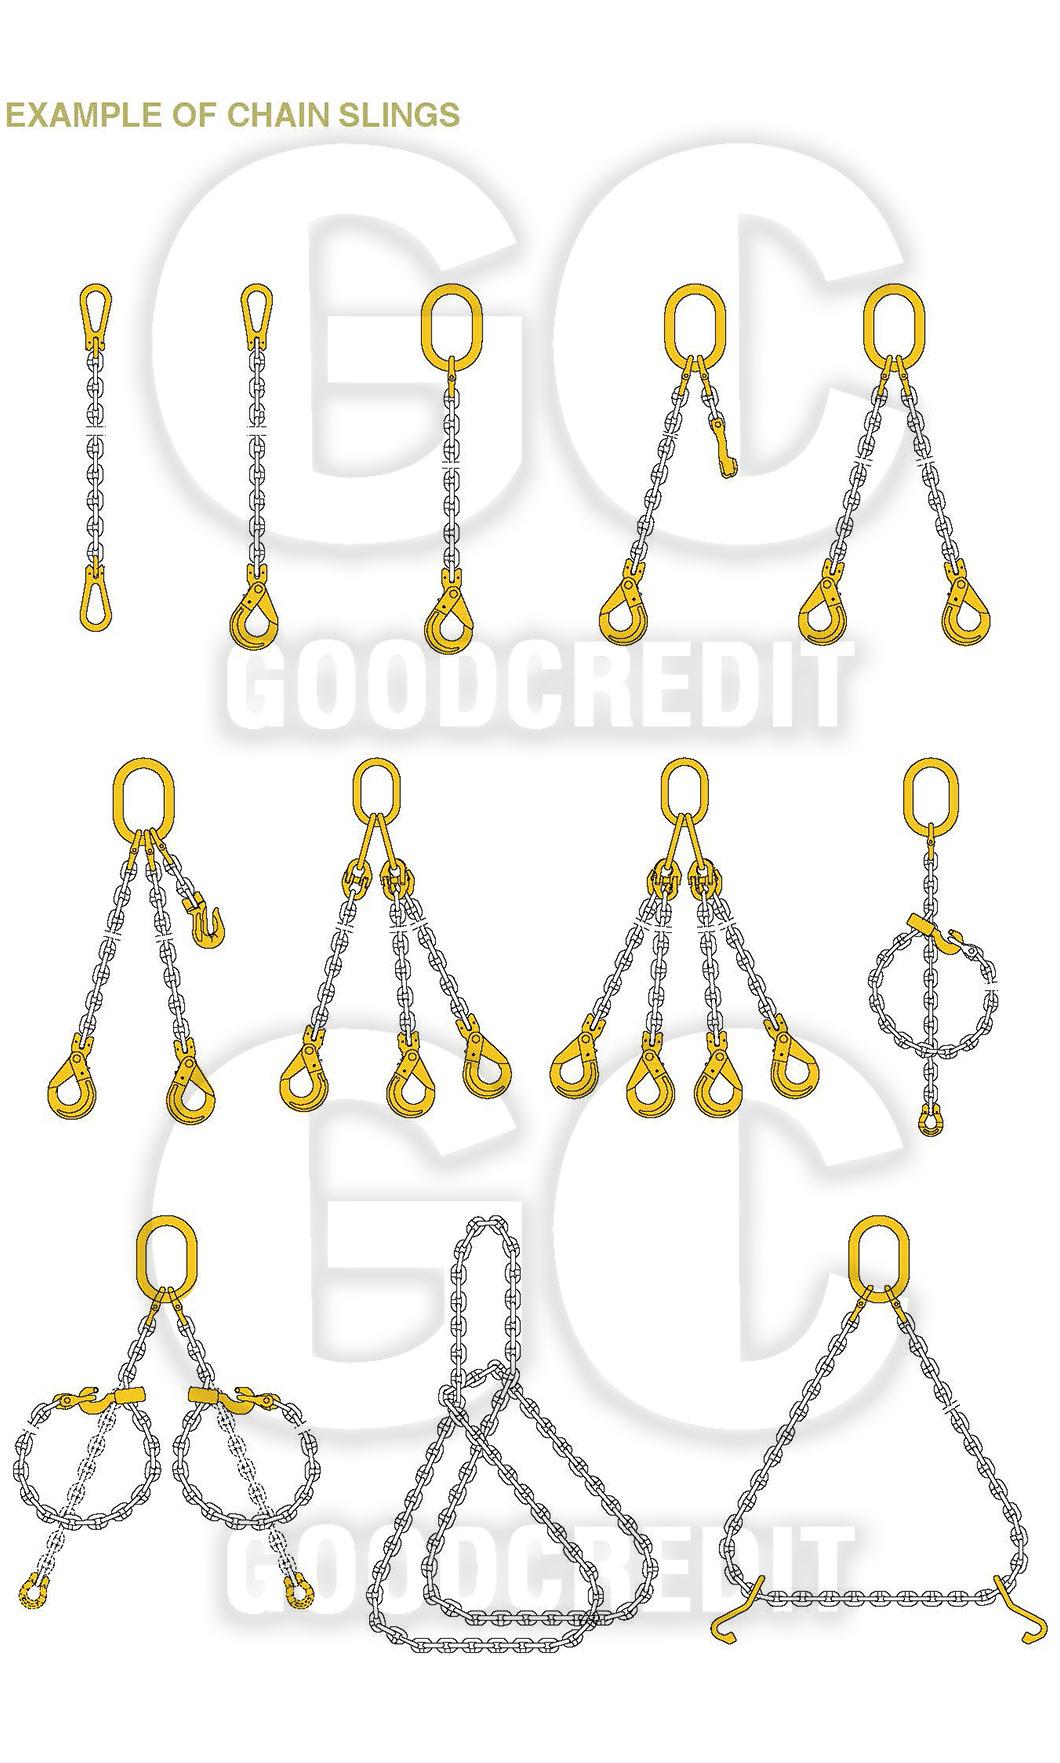 Factory Price Wholesale Best Selling English Standard Galvanized Welded Short Long Link Chain